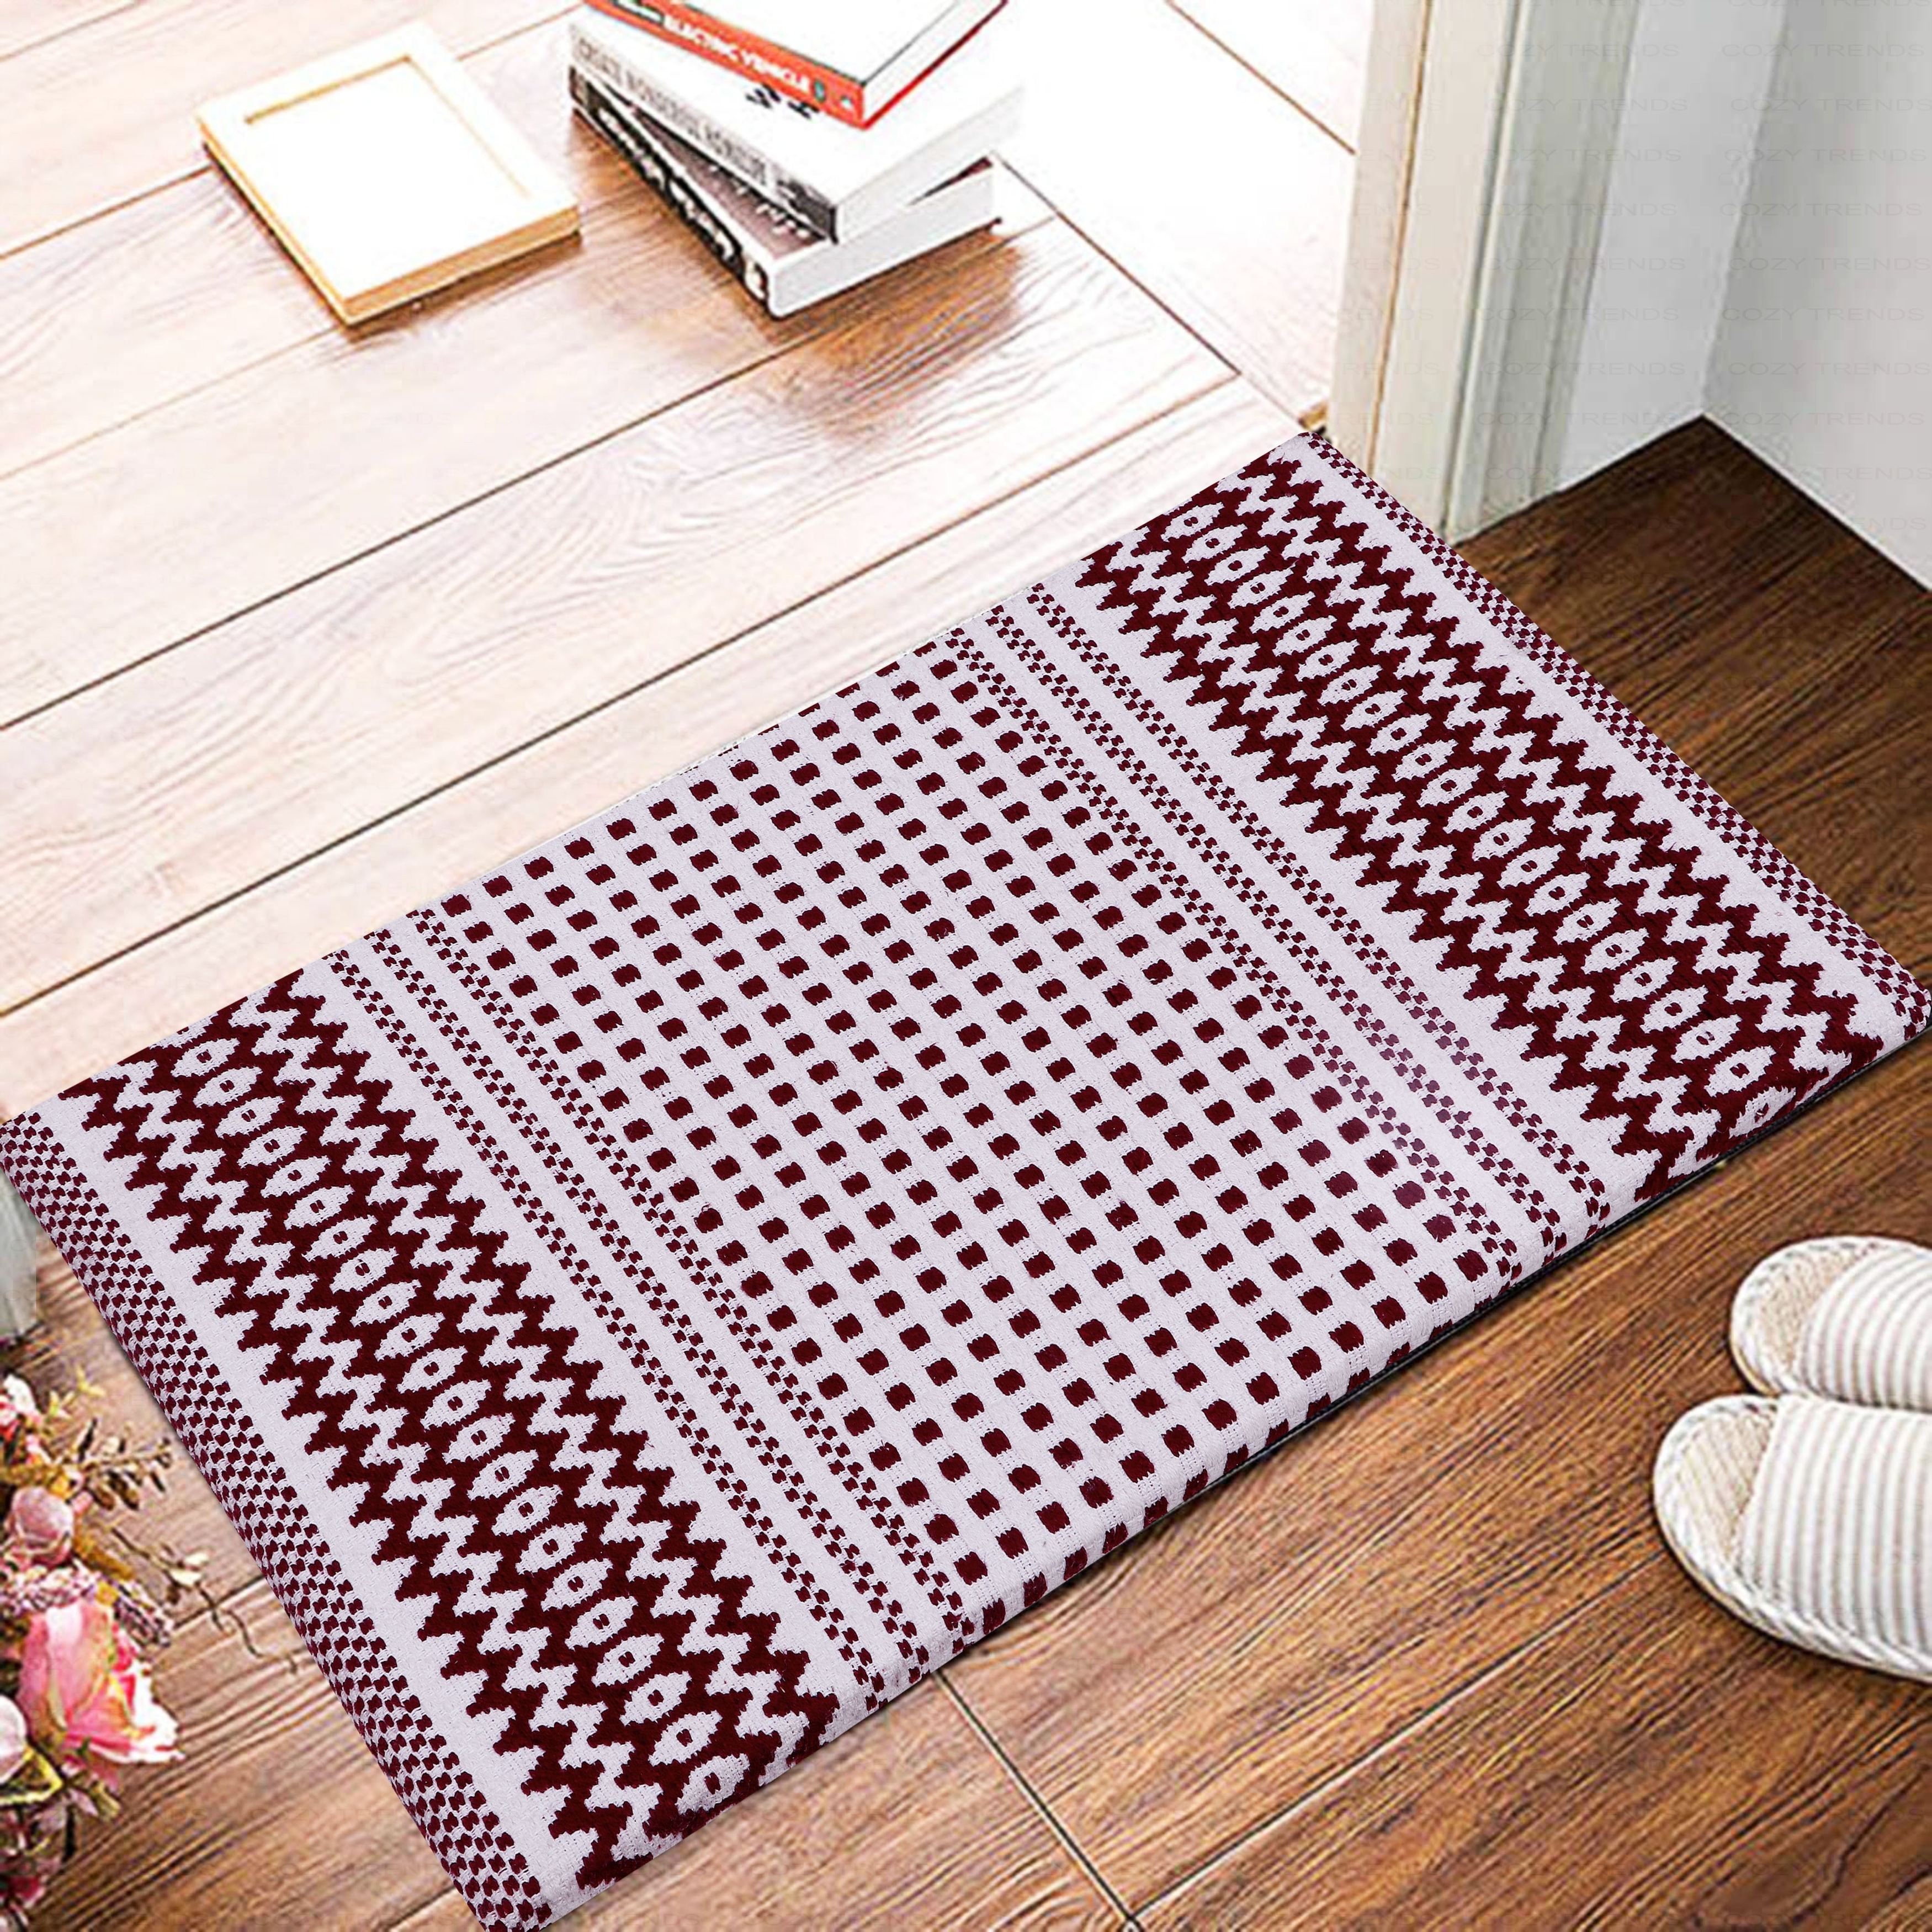 https://ak1.ostkcdn.com/images/products/is/images/direct/2cf6cbe6cec52c50acdc28928cecc54f849134f3/Kitchen-Mat-Cushioned-Anti-Fatigue-Kitchen-Rug%2C-Non-Slip-Mats-Comfort-Foam-Rug-for-Kitchen%2C-Office%2C-Sink%2C-Laundry---18%27%27x30%27%27.jpg